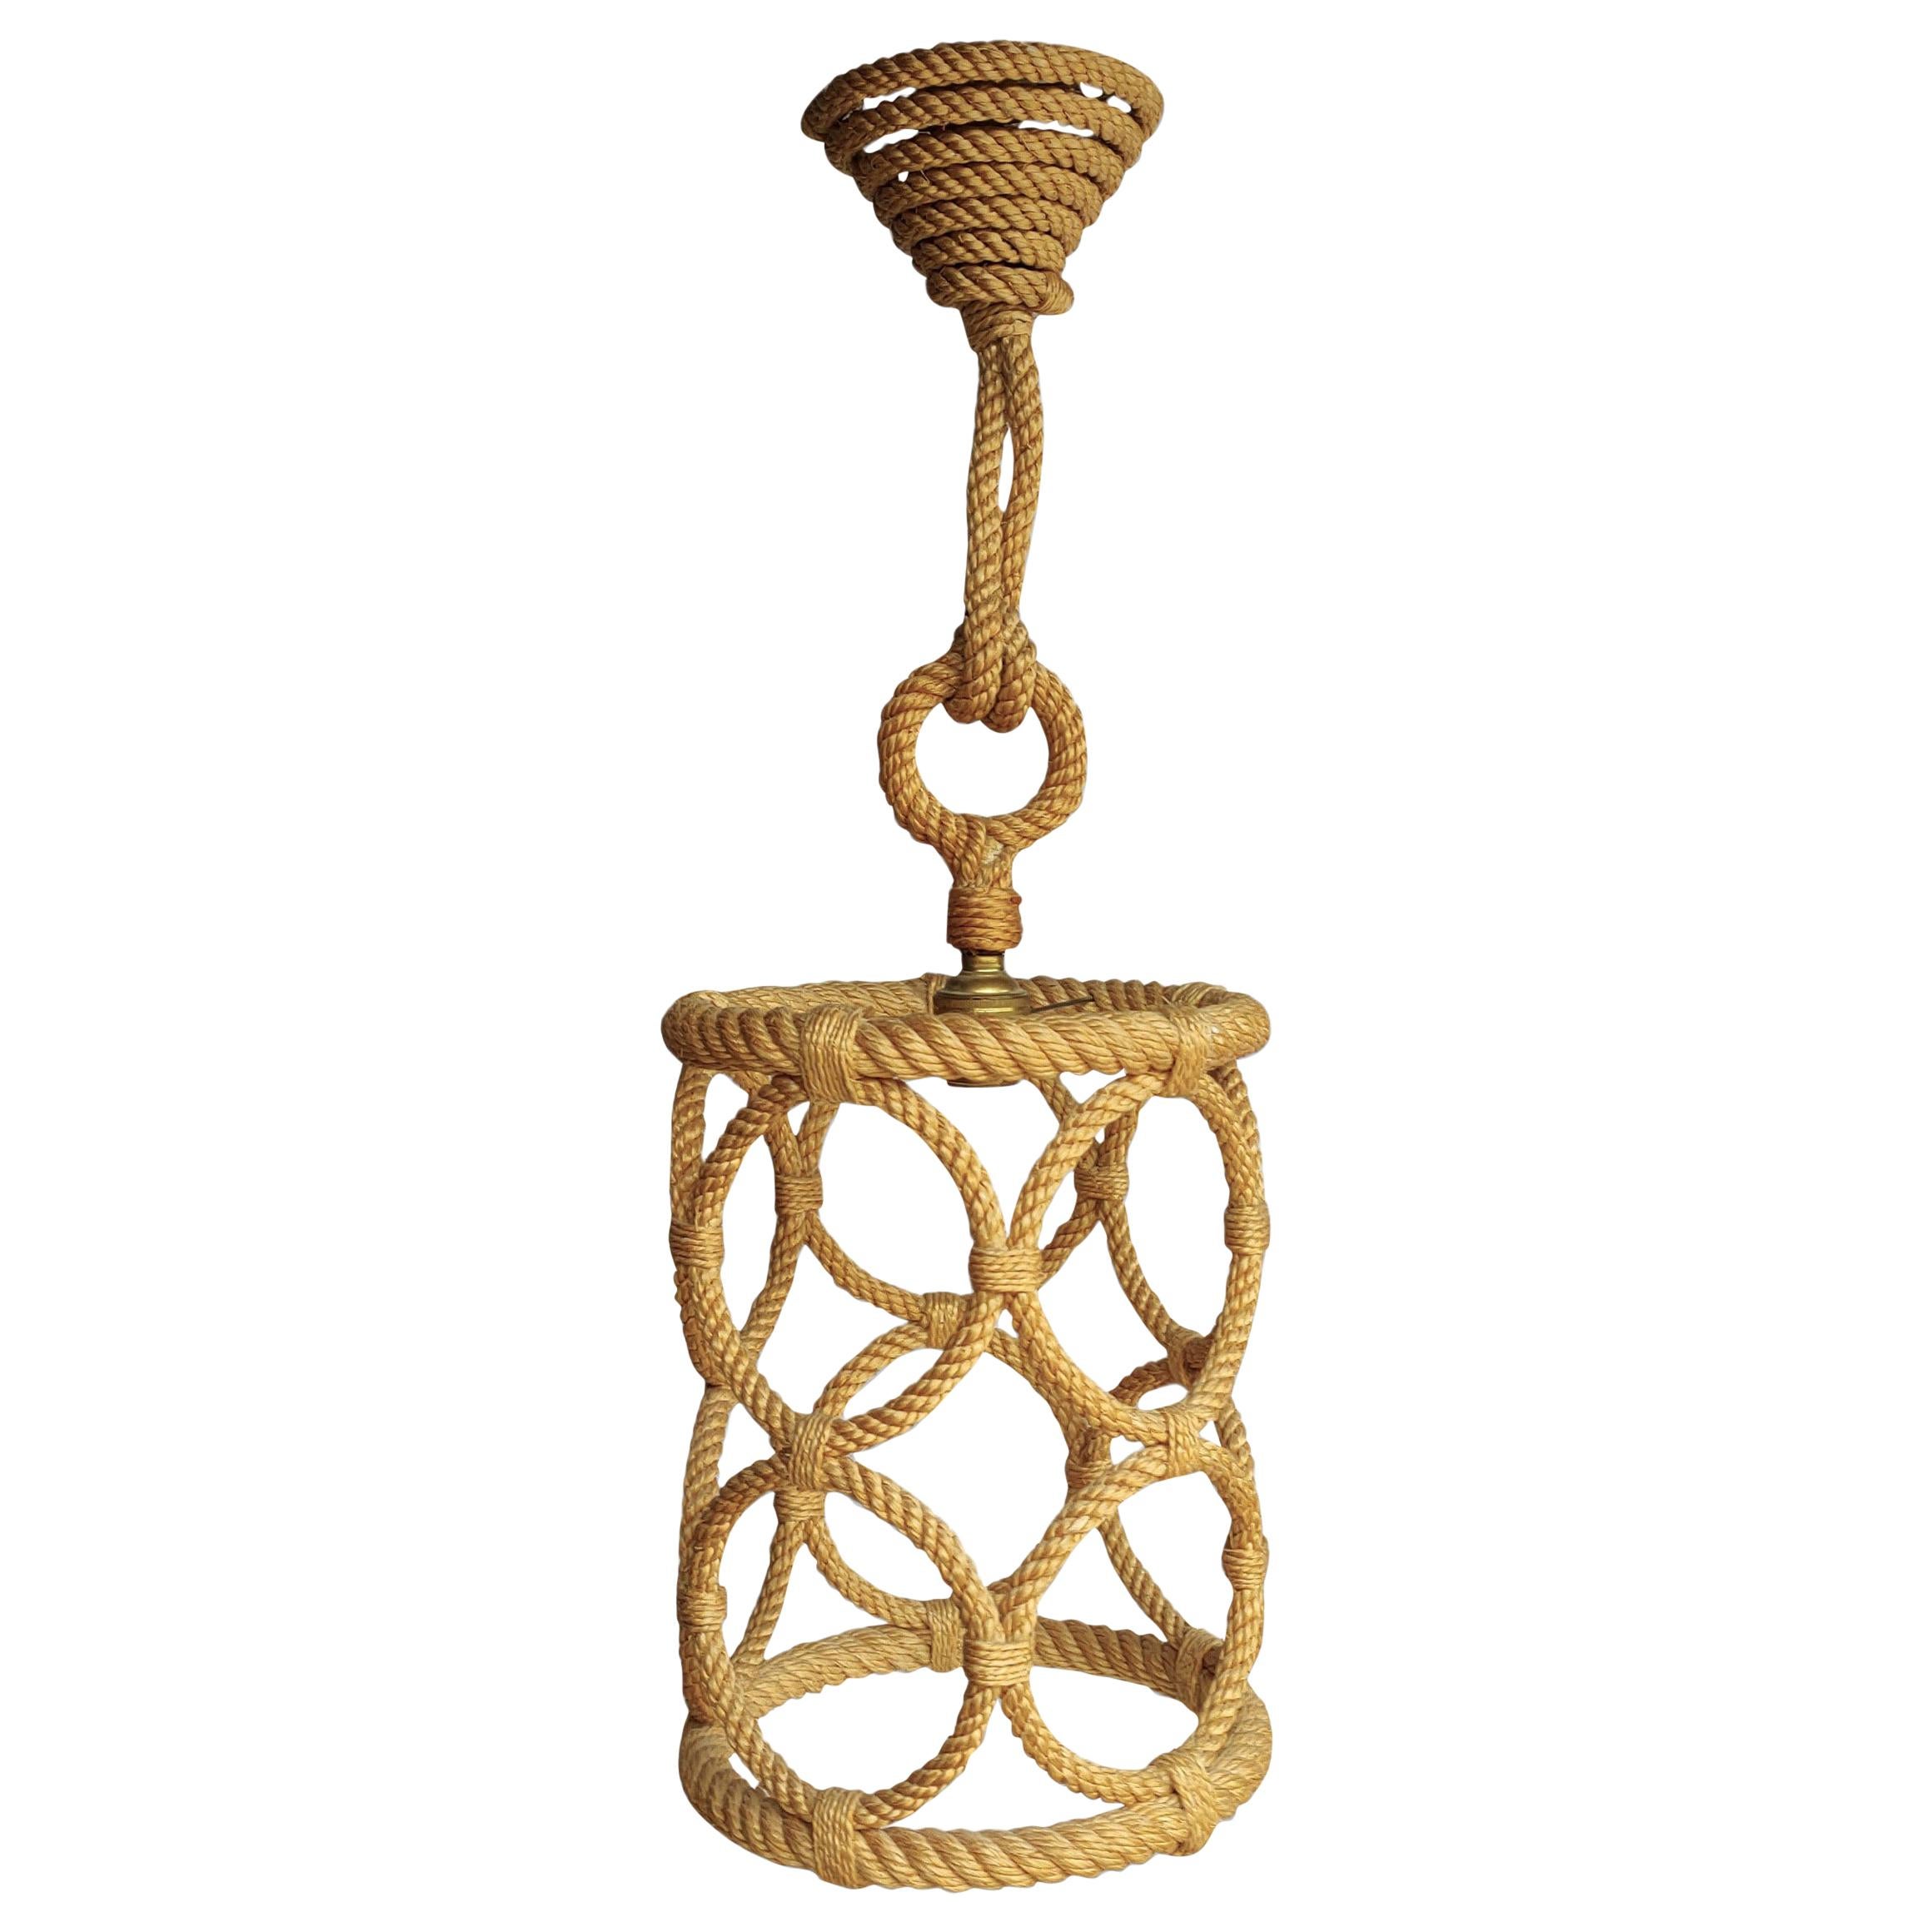 Mint condition rope pendant by French Riviera designers Audoux Minnet
European socket and wiring
this chandelier will ship from Paris and can be returned to either Paris or NY USA
price does not include shipping nor possible customs related